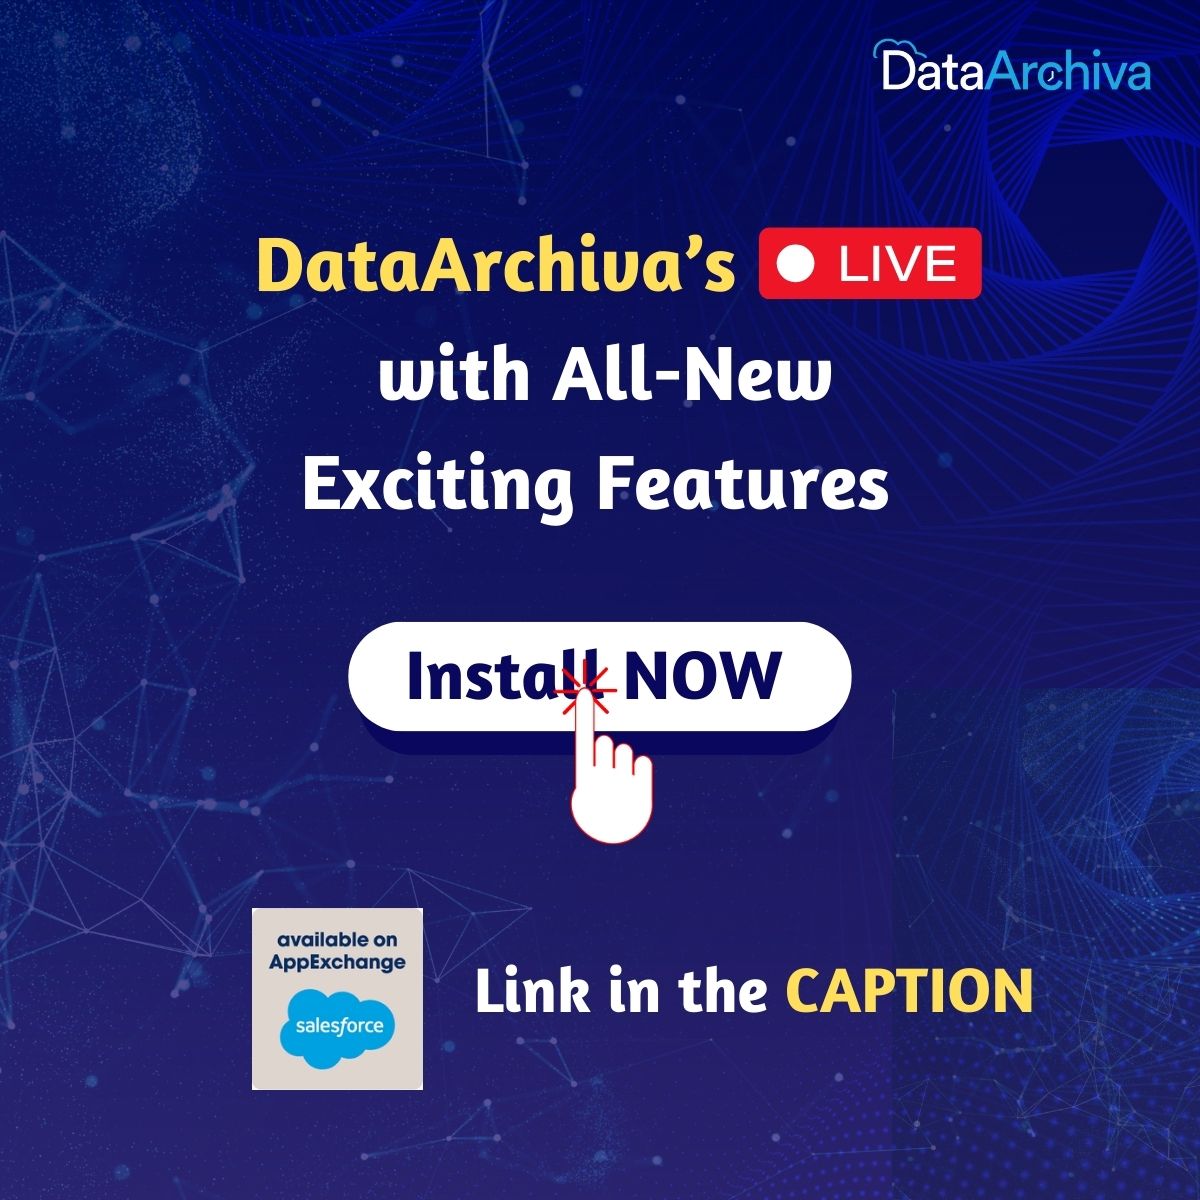 Exciting UPDATE! 🎉 
Time to test the all-new features of DataArchiva ! Get the app from the AppExchange now ➡️ buff.ly/43oDHbK
#Salesforce #SalesforceAdmin #SalesforceConsultant #SalesforceArchitect #AwesomeAdmin #SalesforceAdmins #SalesforceDeveloper #AppExchange